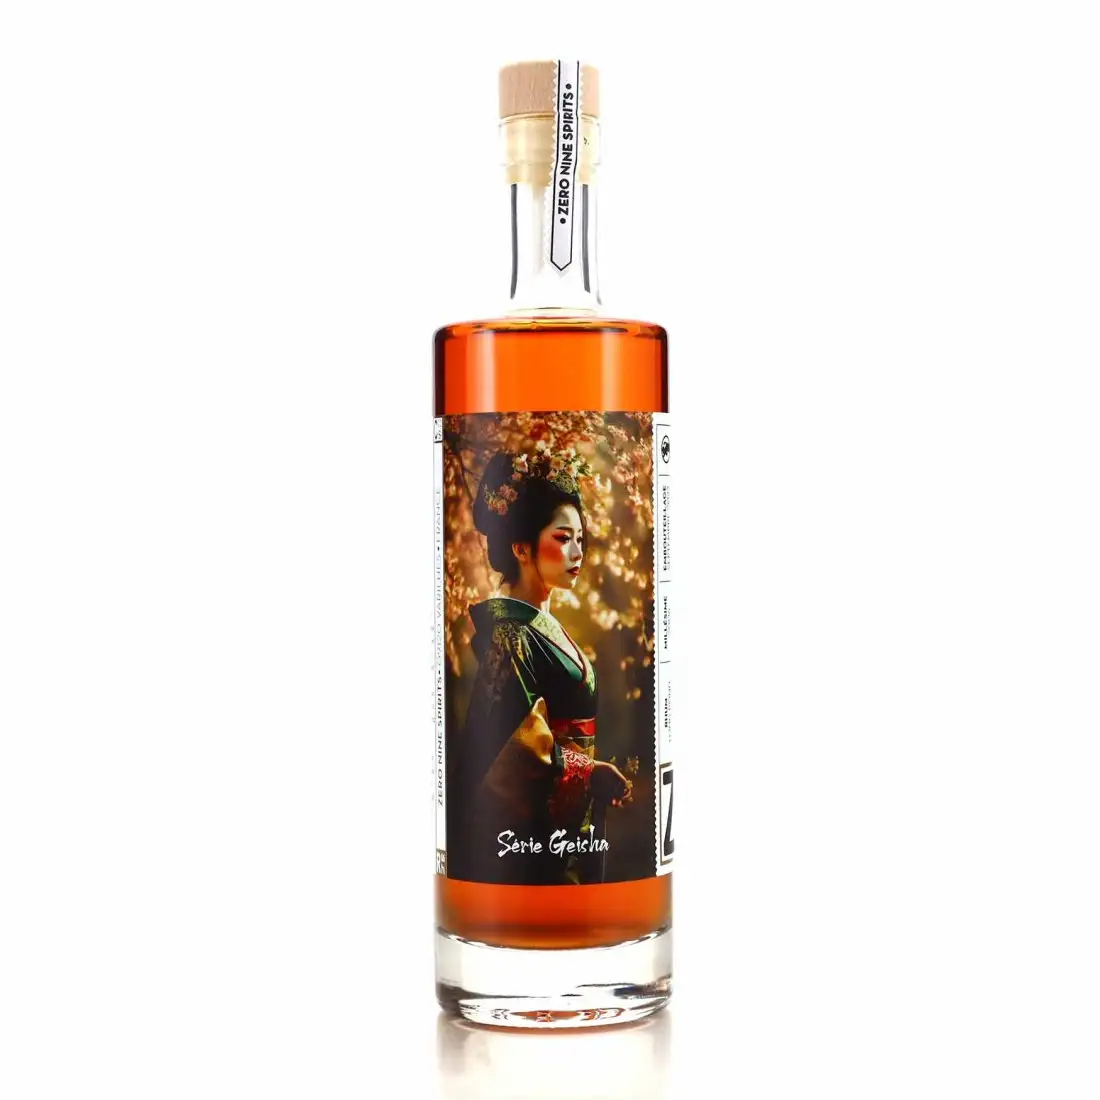 Image of the front of the bottle of the rum Série Geisha N°1 (1er Anniversaire Clos des Spiritueux) ITP